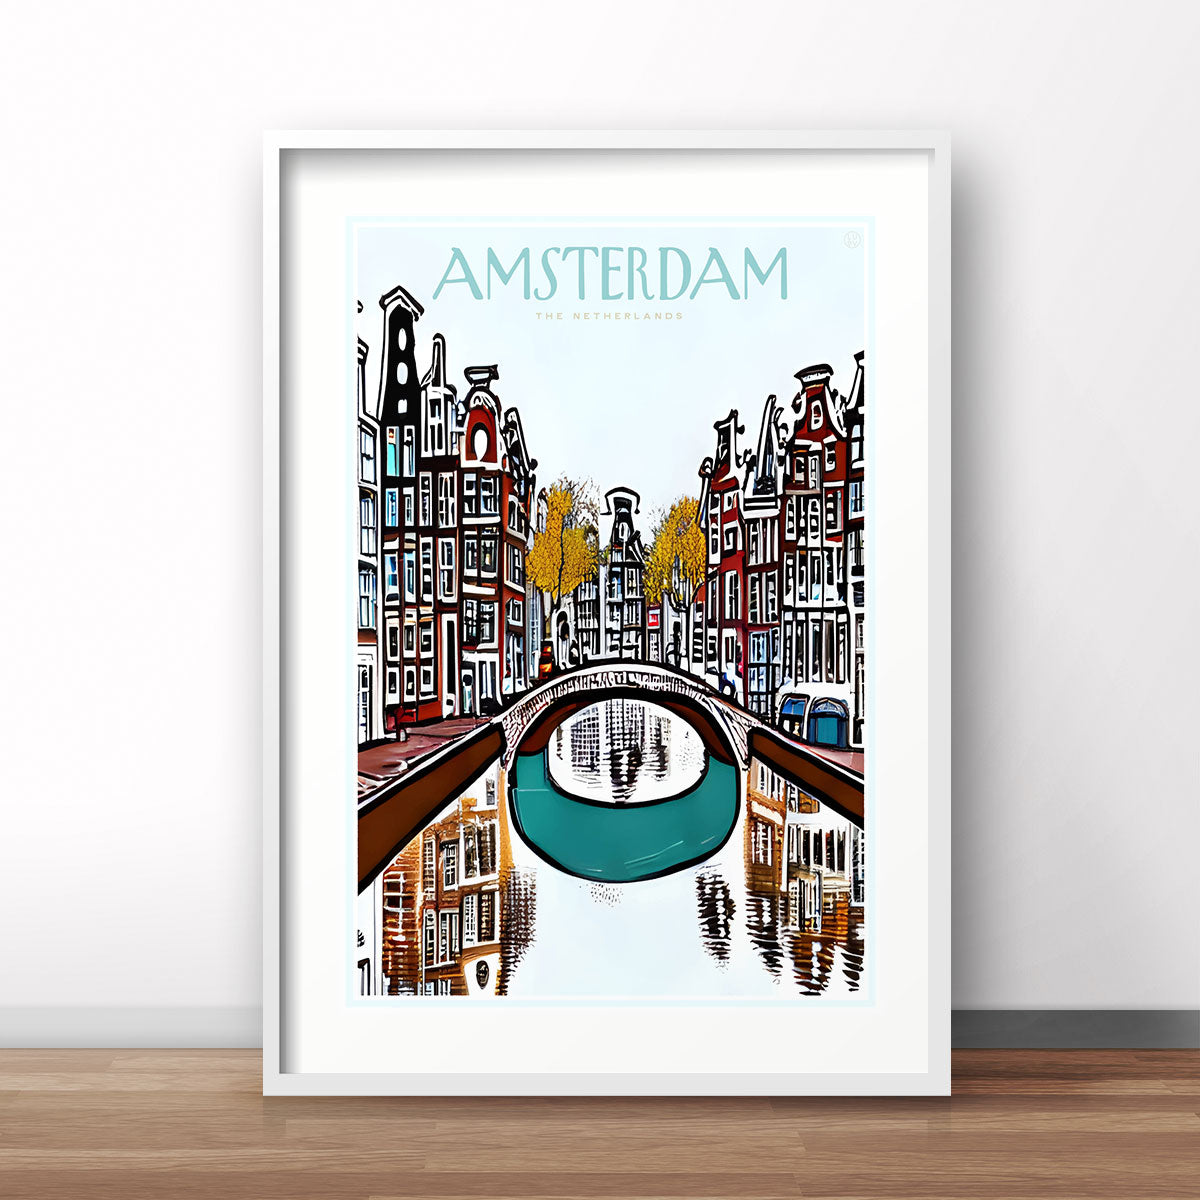 Amsterdam the Netherlands retro vintage travel poster print from Places We Luv